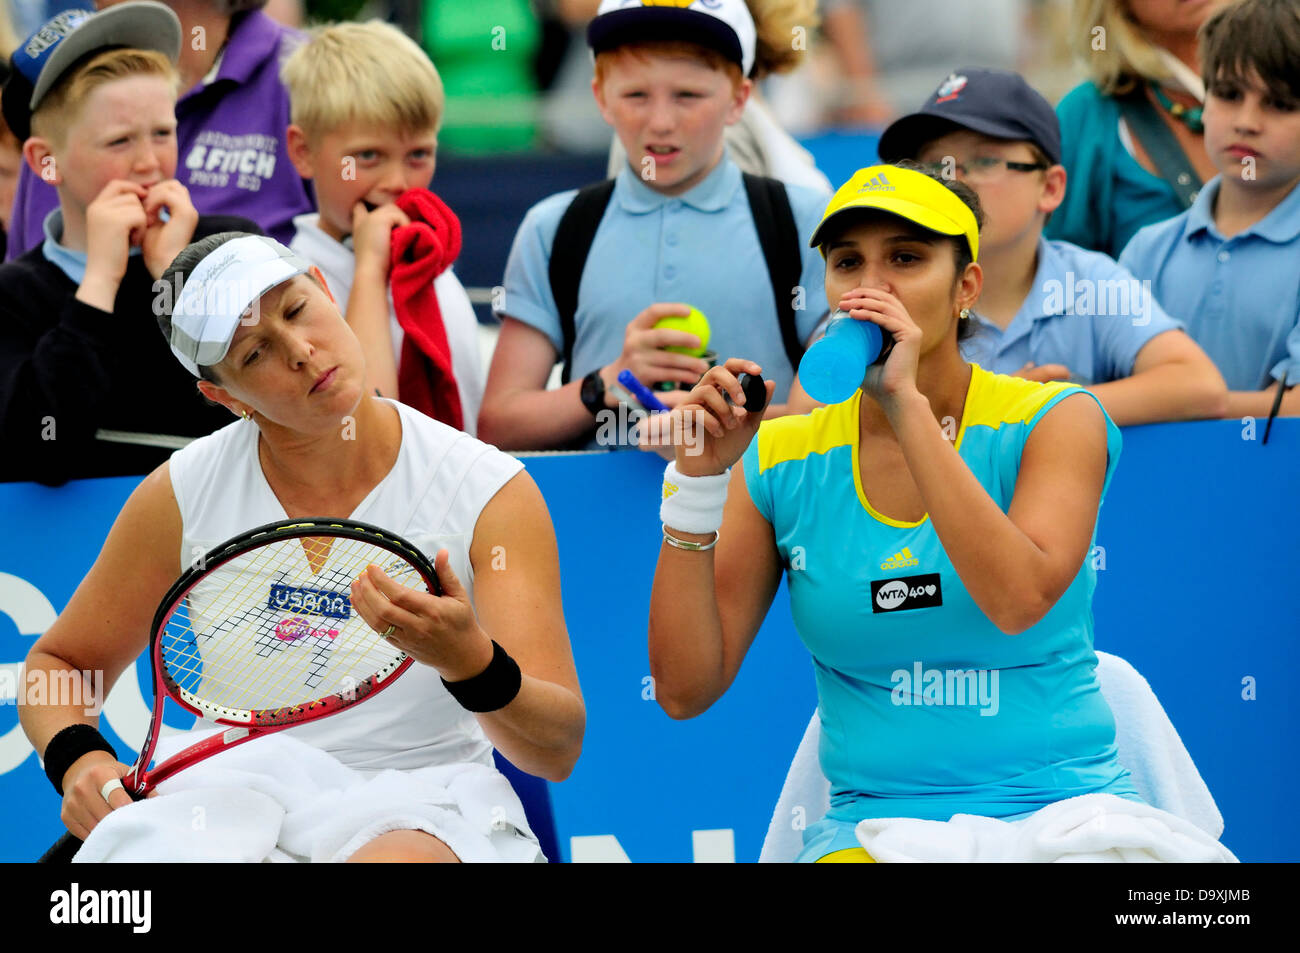 Sania Mirza (India) and Liezel Huber (USA) playing doubles. Children watching at Eastbourne, 2013 Stock Photo